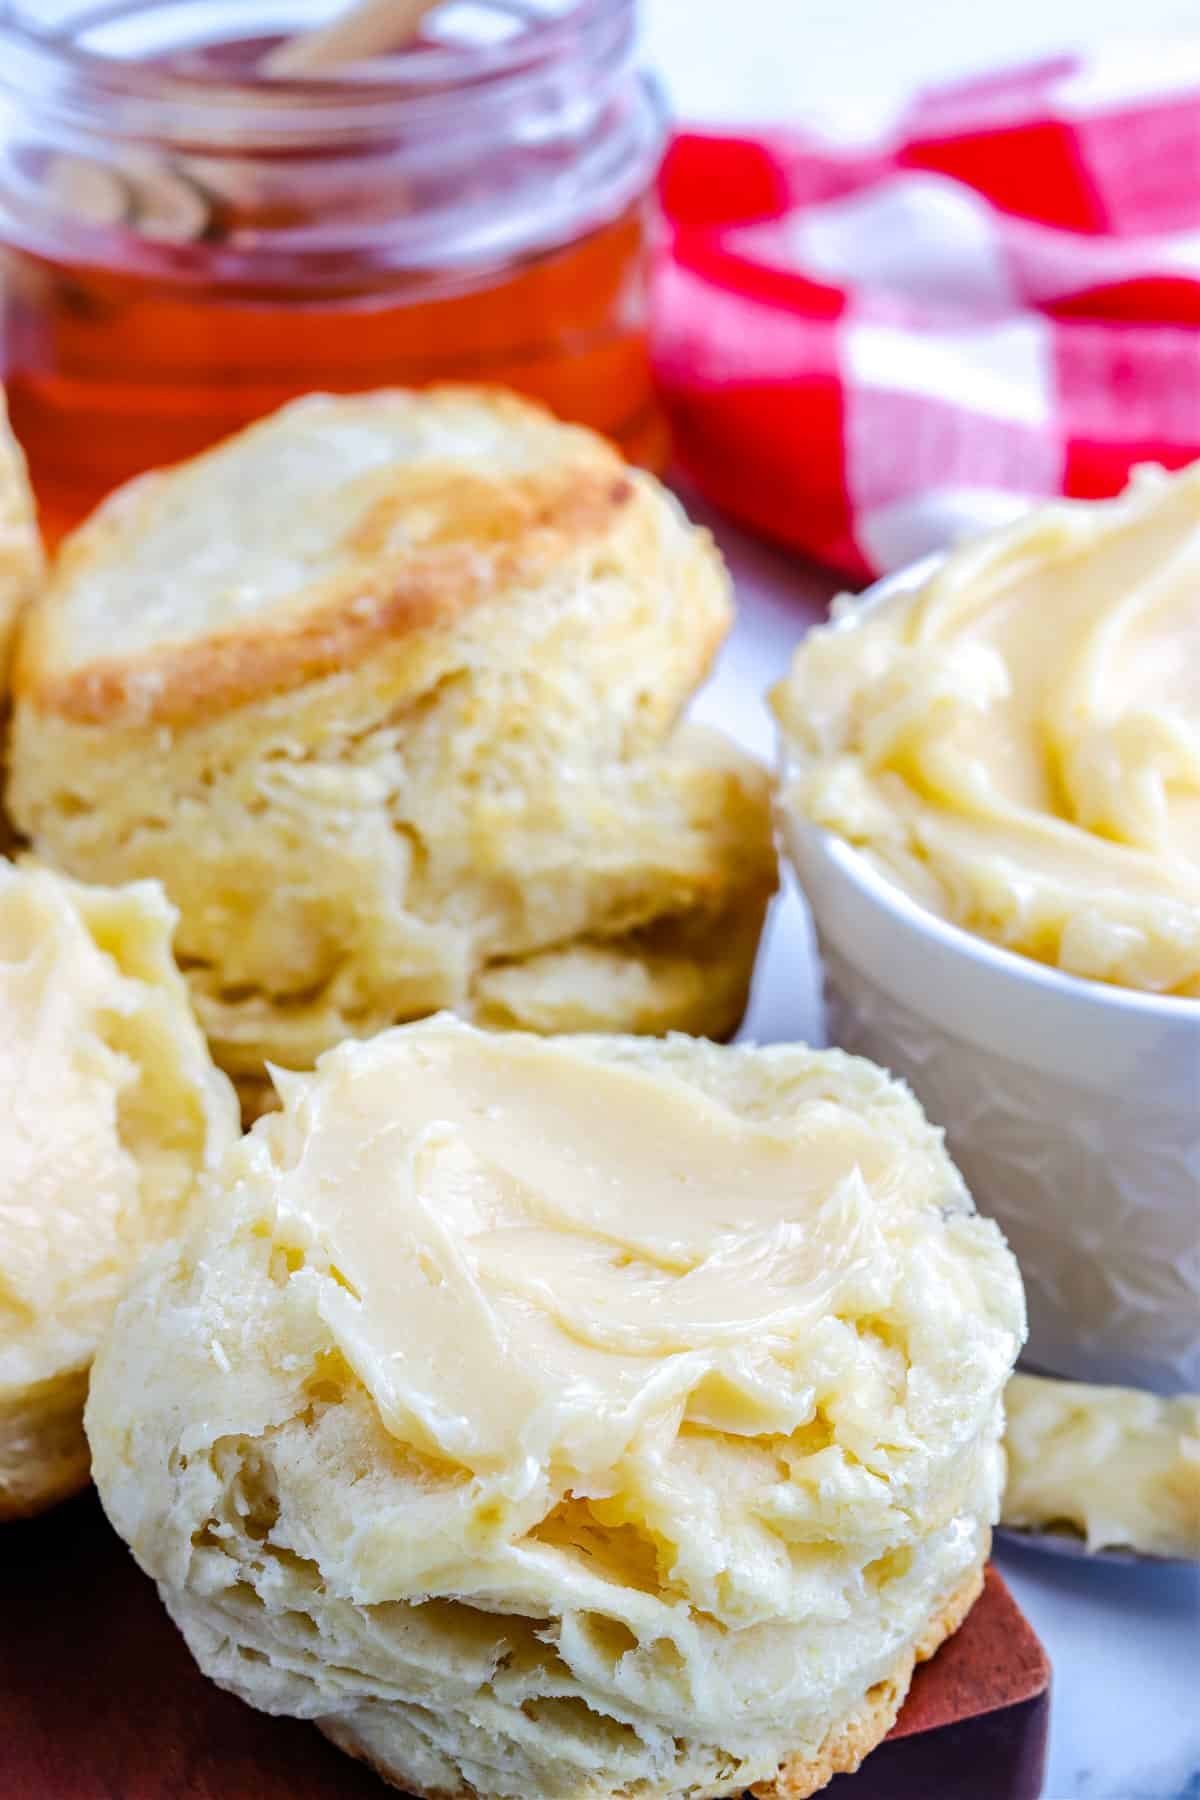 Honey Whipped Butter spread on biscuits.